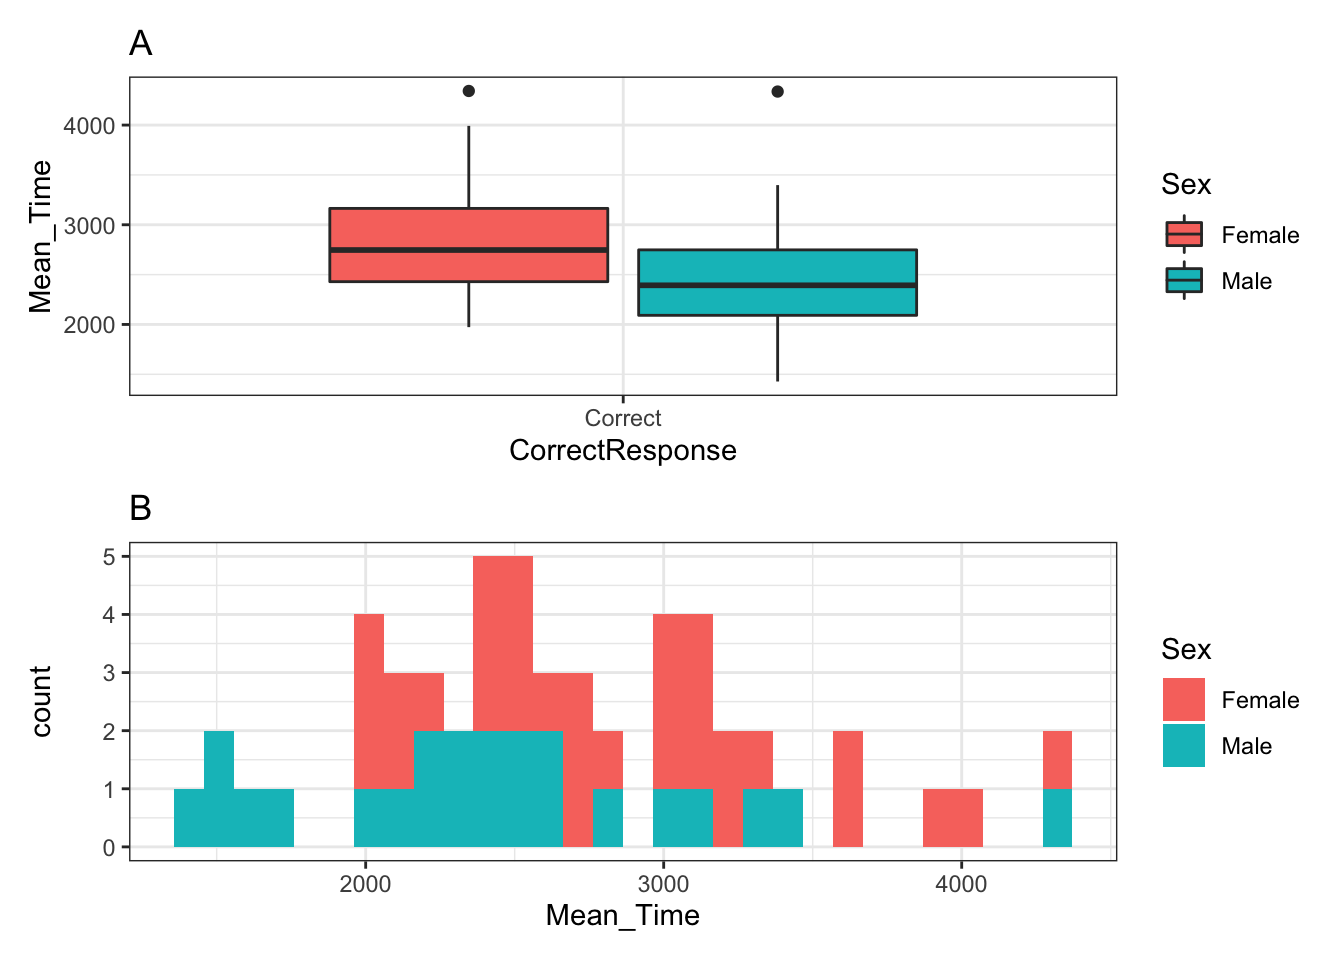 A boxplot (A - top) of the spreads of Mean Time for Correct Responses, and histogram (B - bottom) of distribution of Mean Time counts, both separated by Sex (female - red, male - cyan)